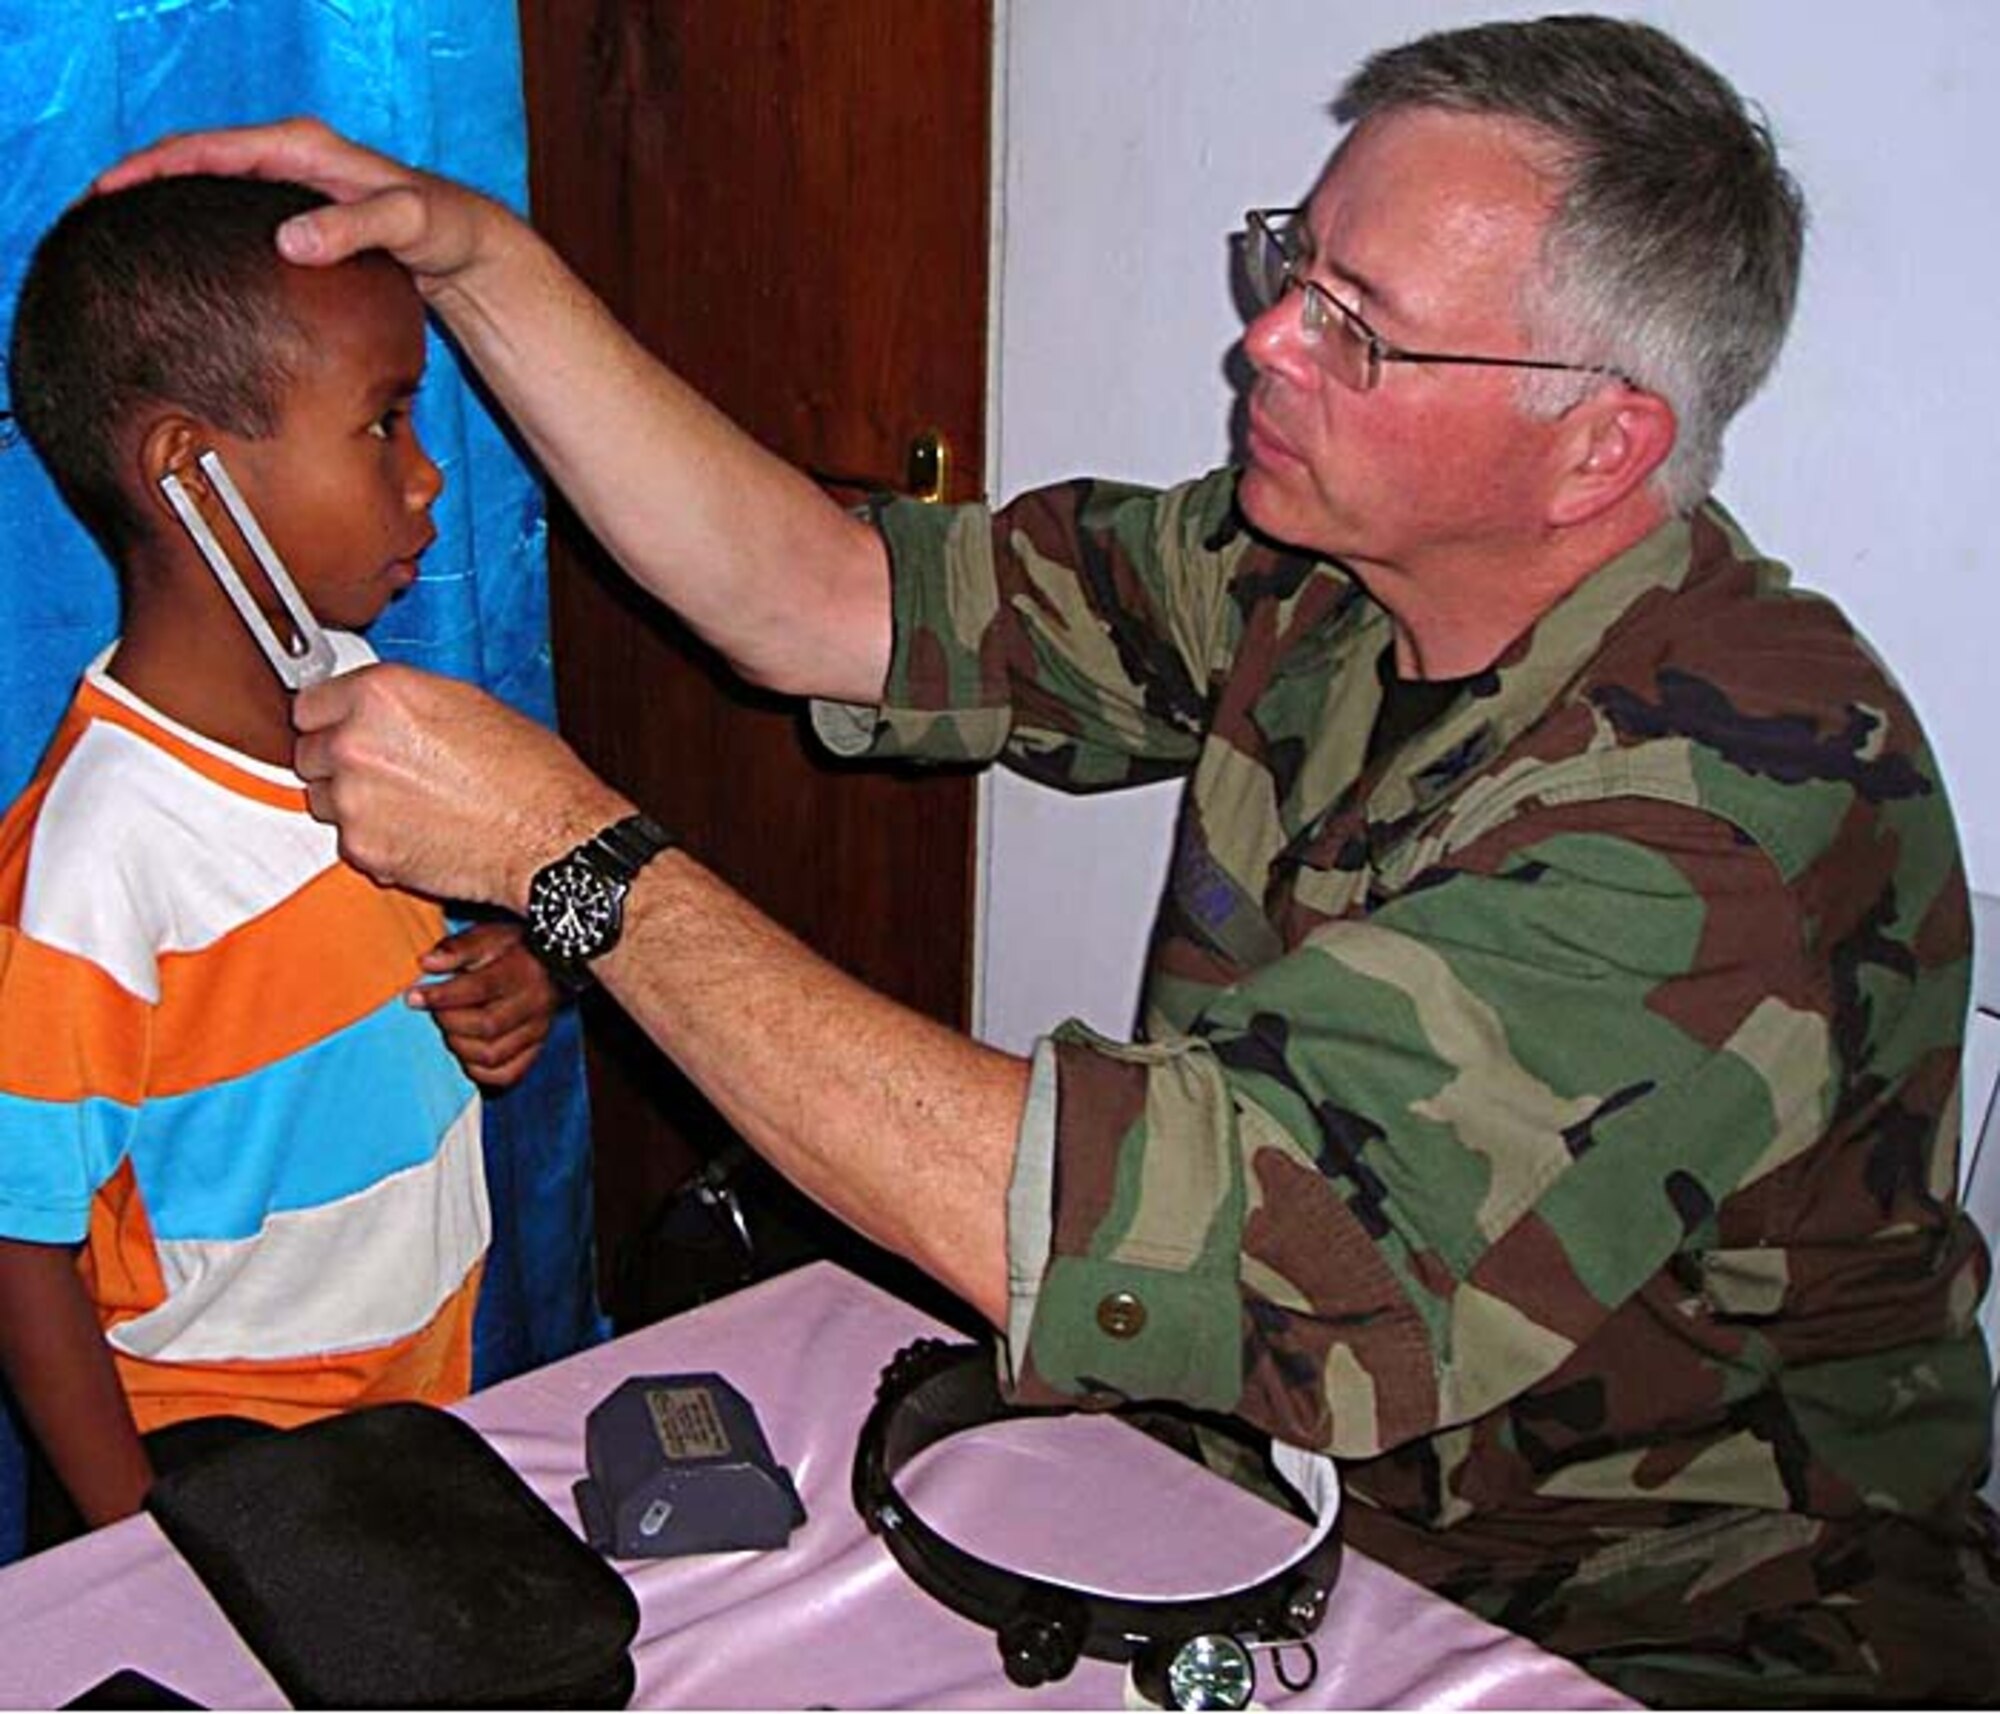 A little Timorese boy gets his hearing checked by Col. Paul Abson, operations flight commander, 446th Aeromedical Staging Squadron, McChord Air Force Base, Wash.  Colonel Abson and a team of Reserve medical experts were deployed to West Timor July 16-23, in support of the continuing humanitarian mission of Pacific Angel. (Courtesy photo)